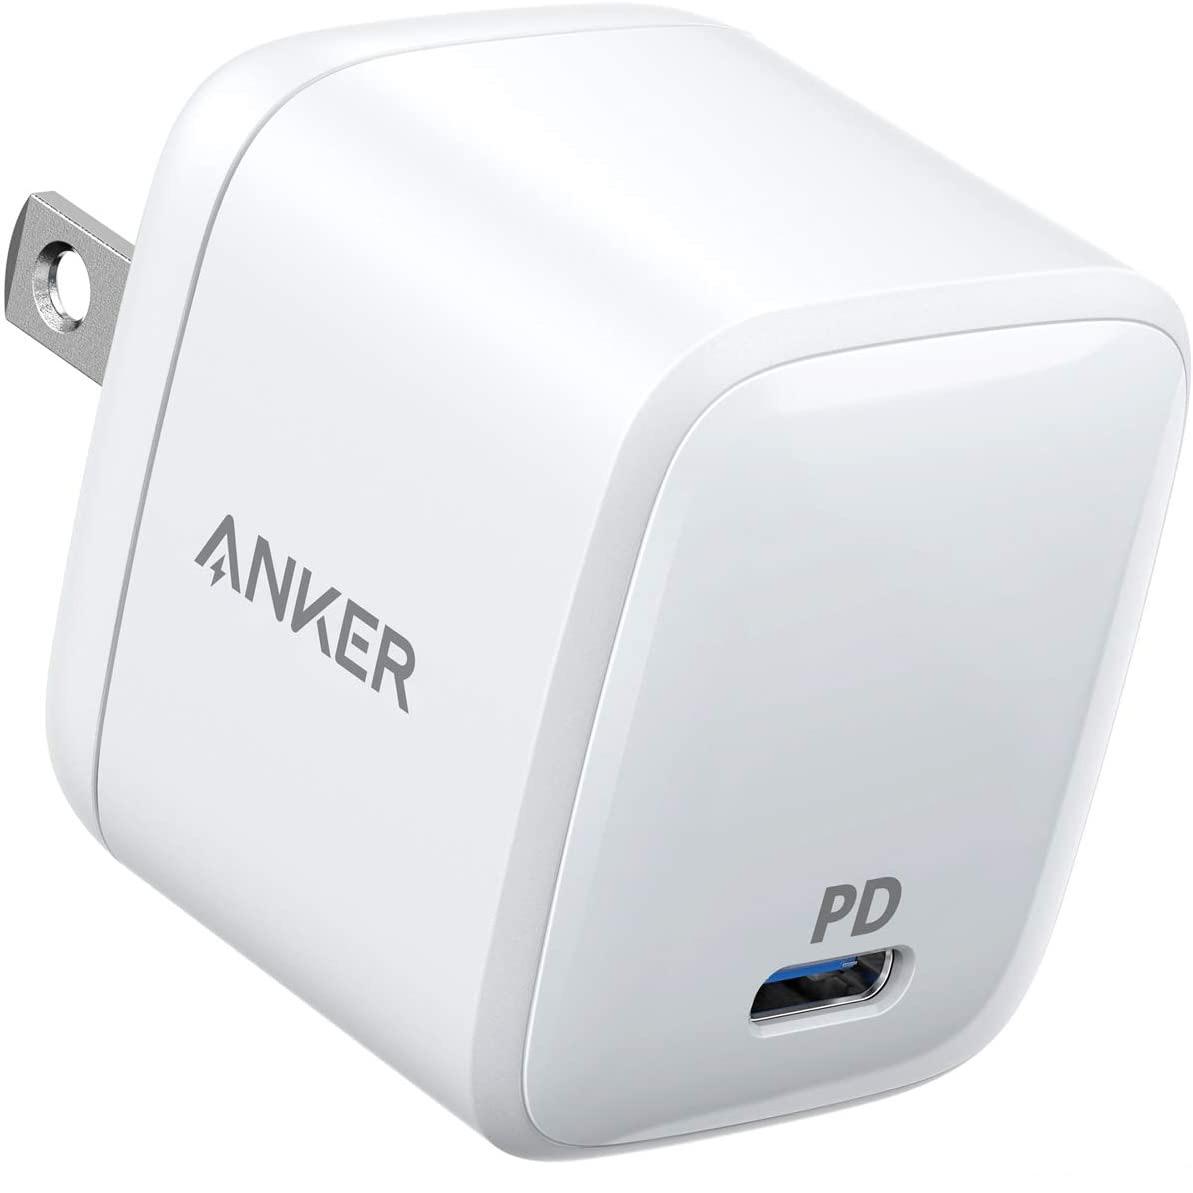 Anker USB-C Wall Charger